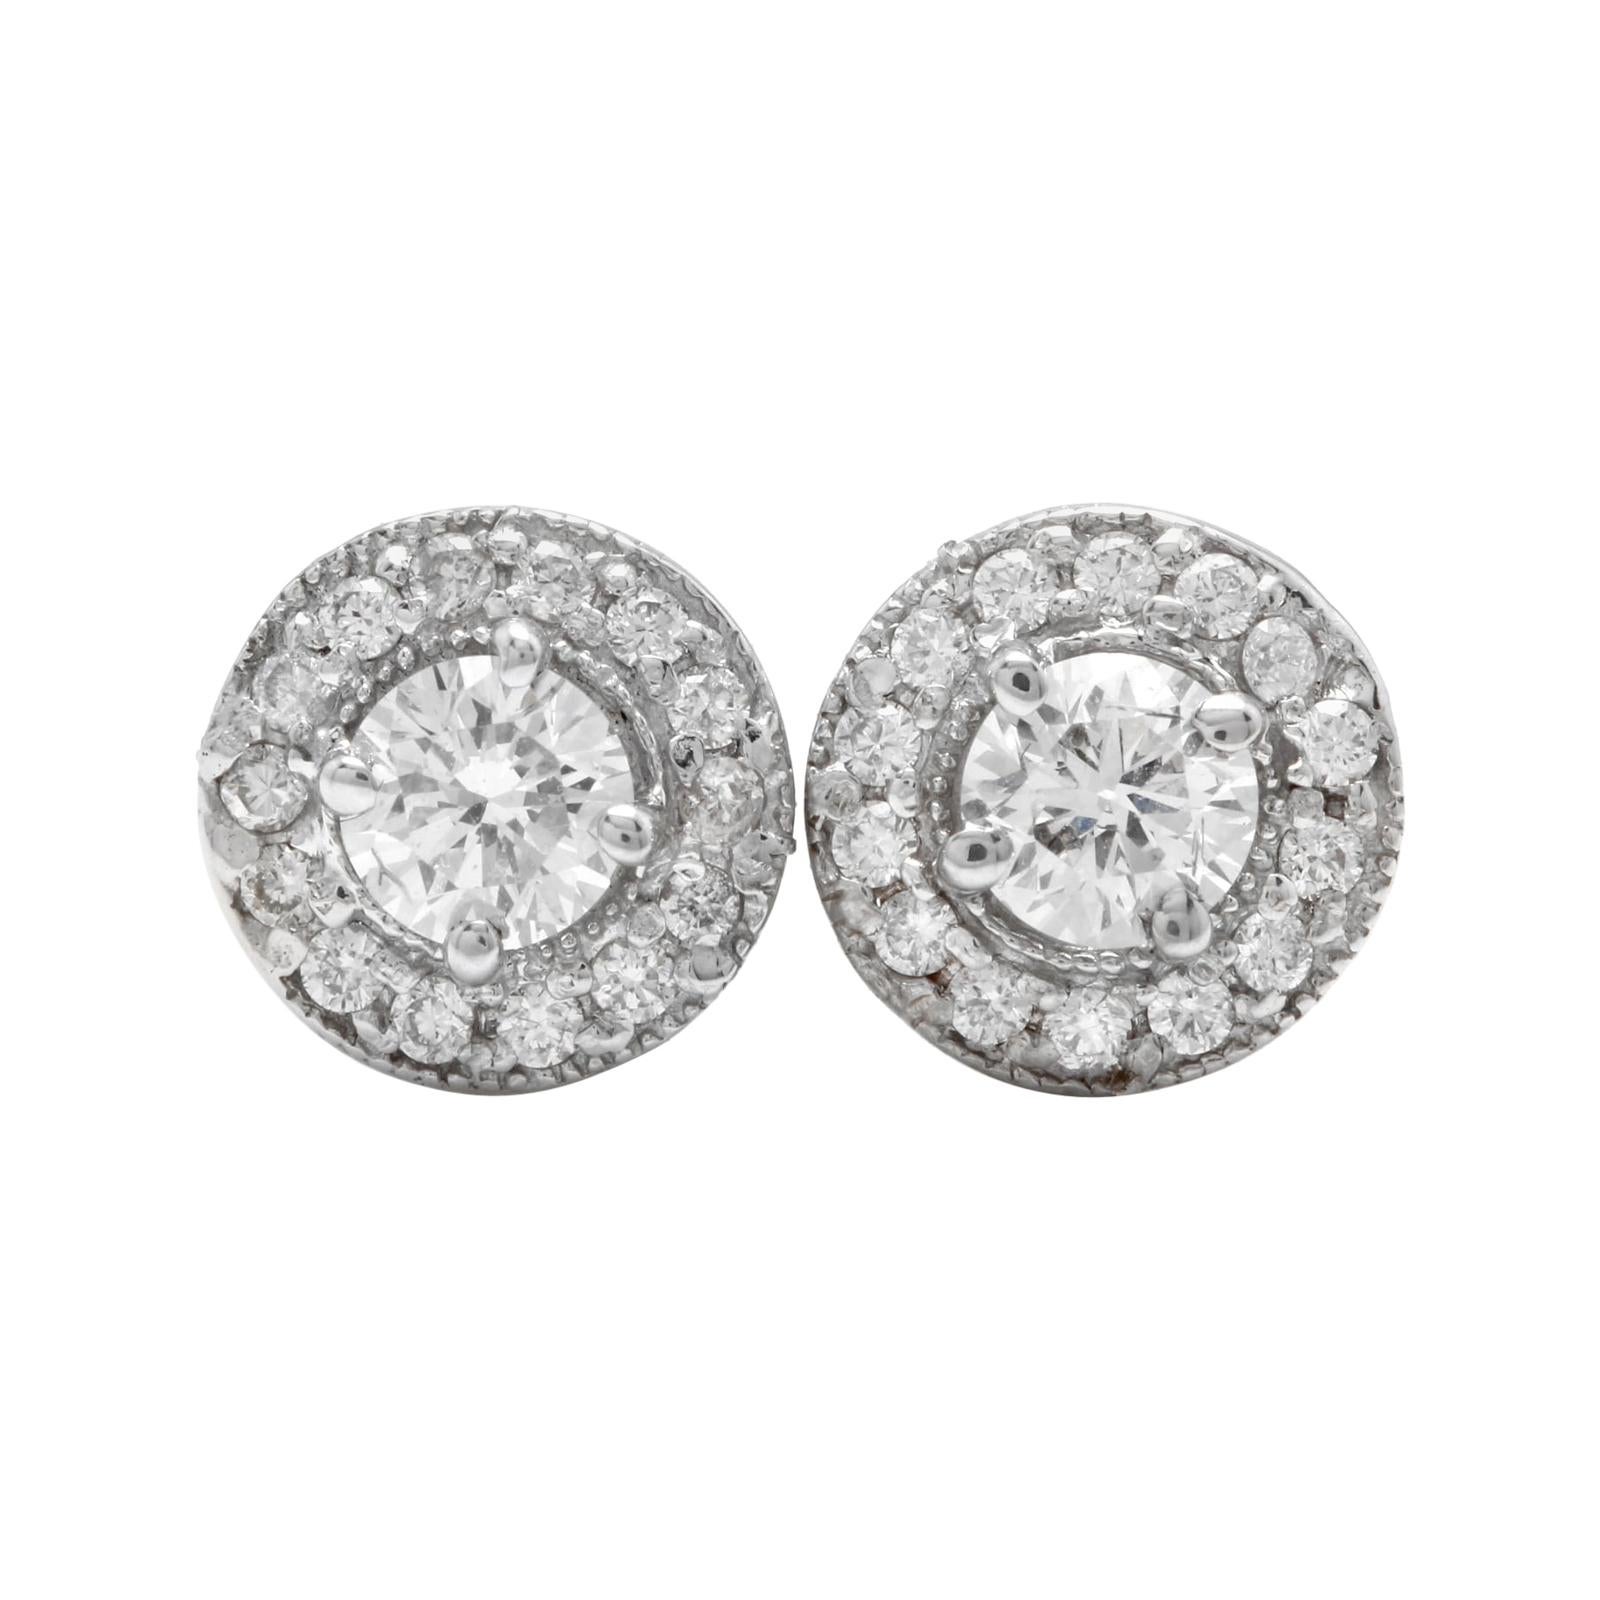 Exquisite 0.85 Carat Natural Diamond 14 Karat Solid White Gold Stud Earrings For Sale